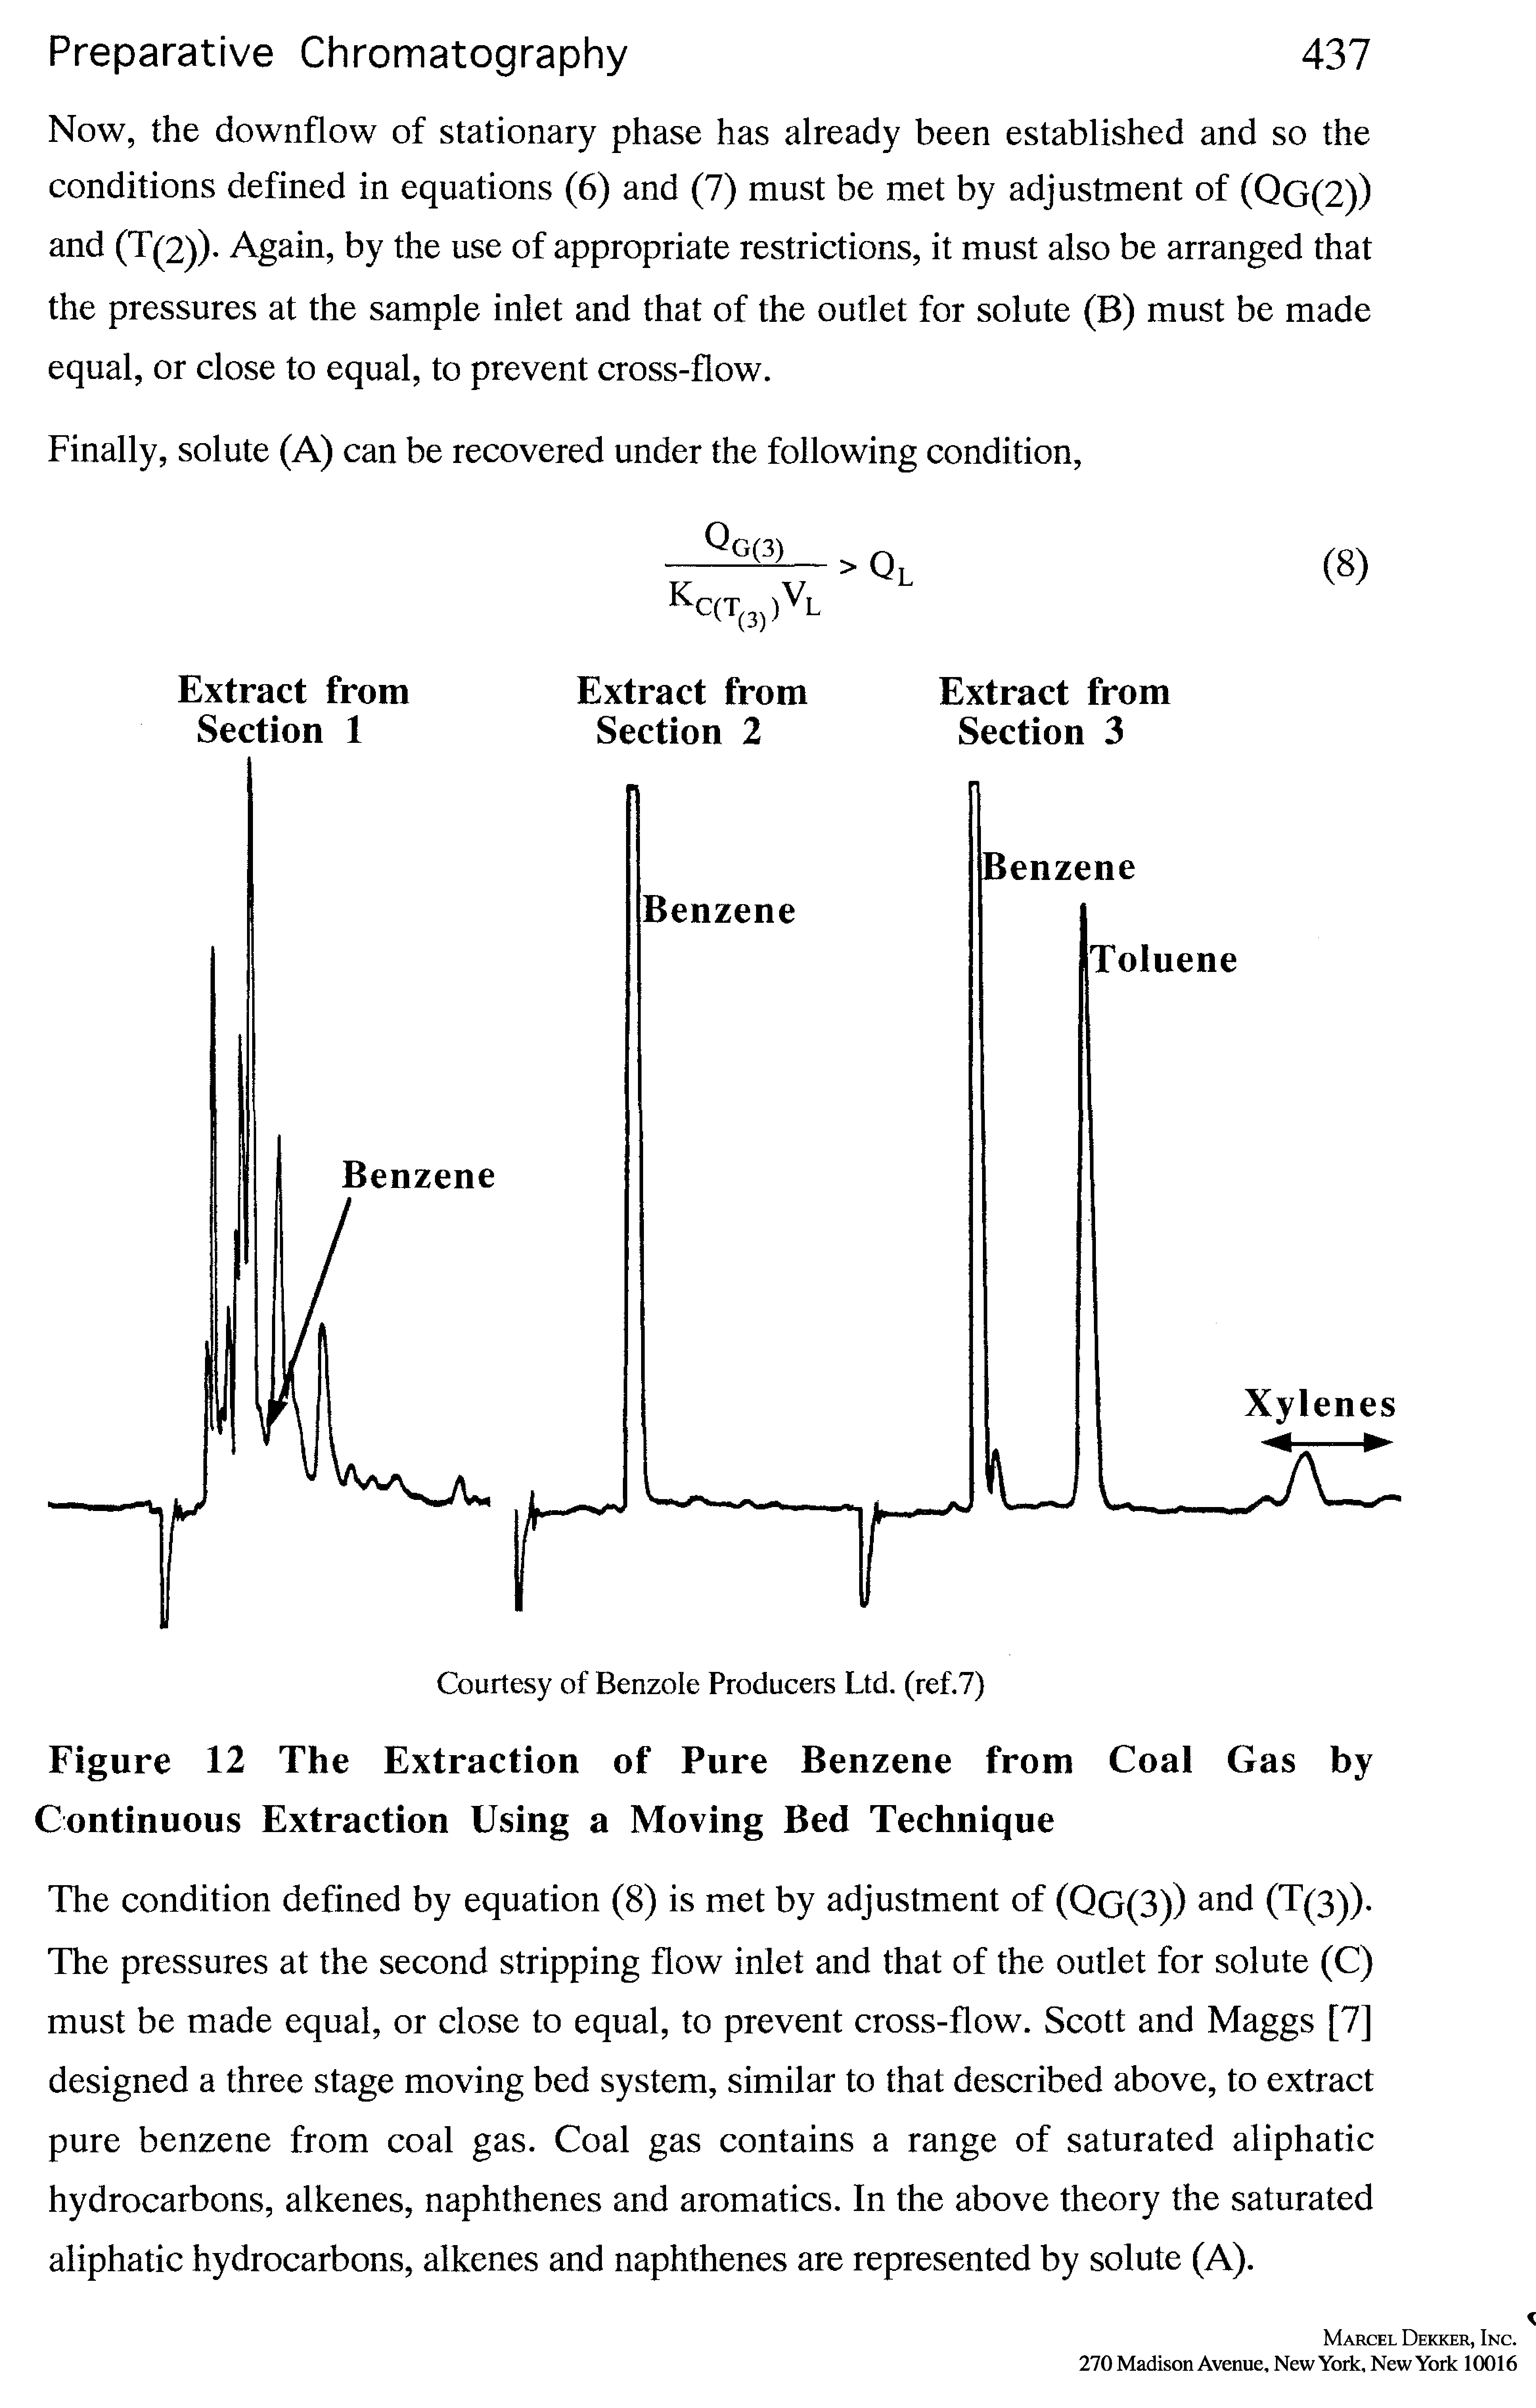 Figure 12 The Extraction of Pure Benzene from Coal Gas by Continuous Extraction Using a Moving Bed Technique...